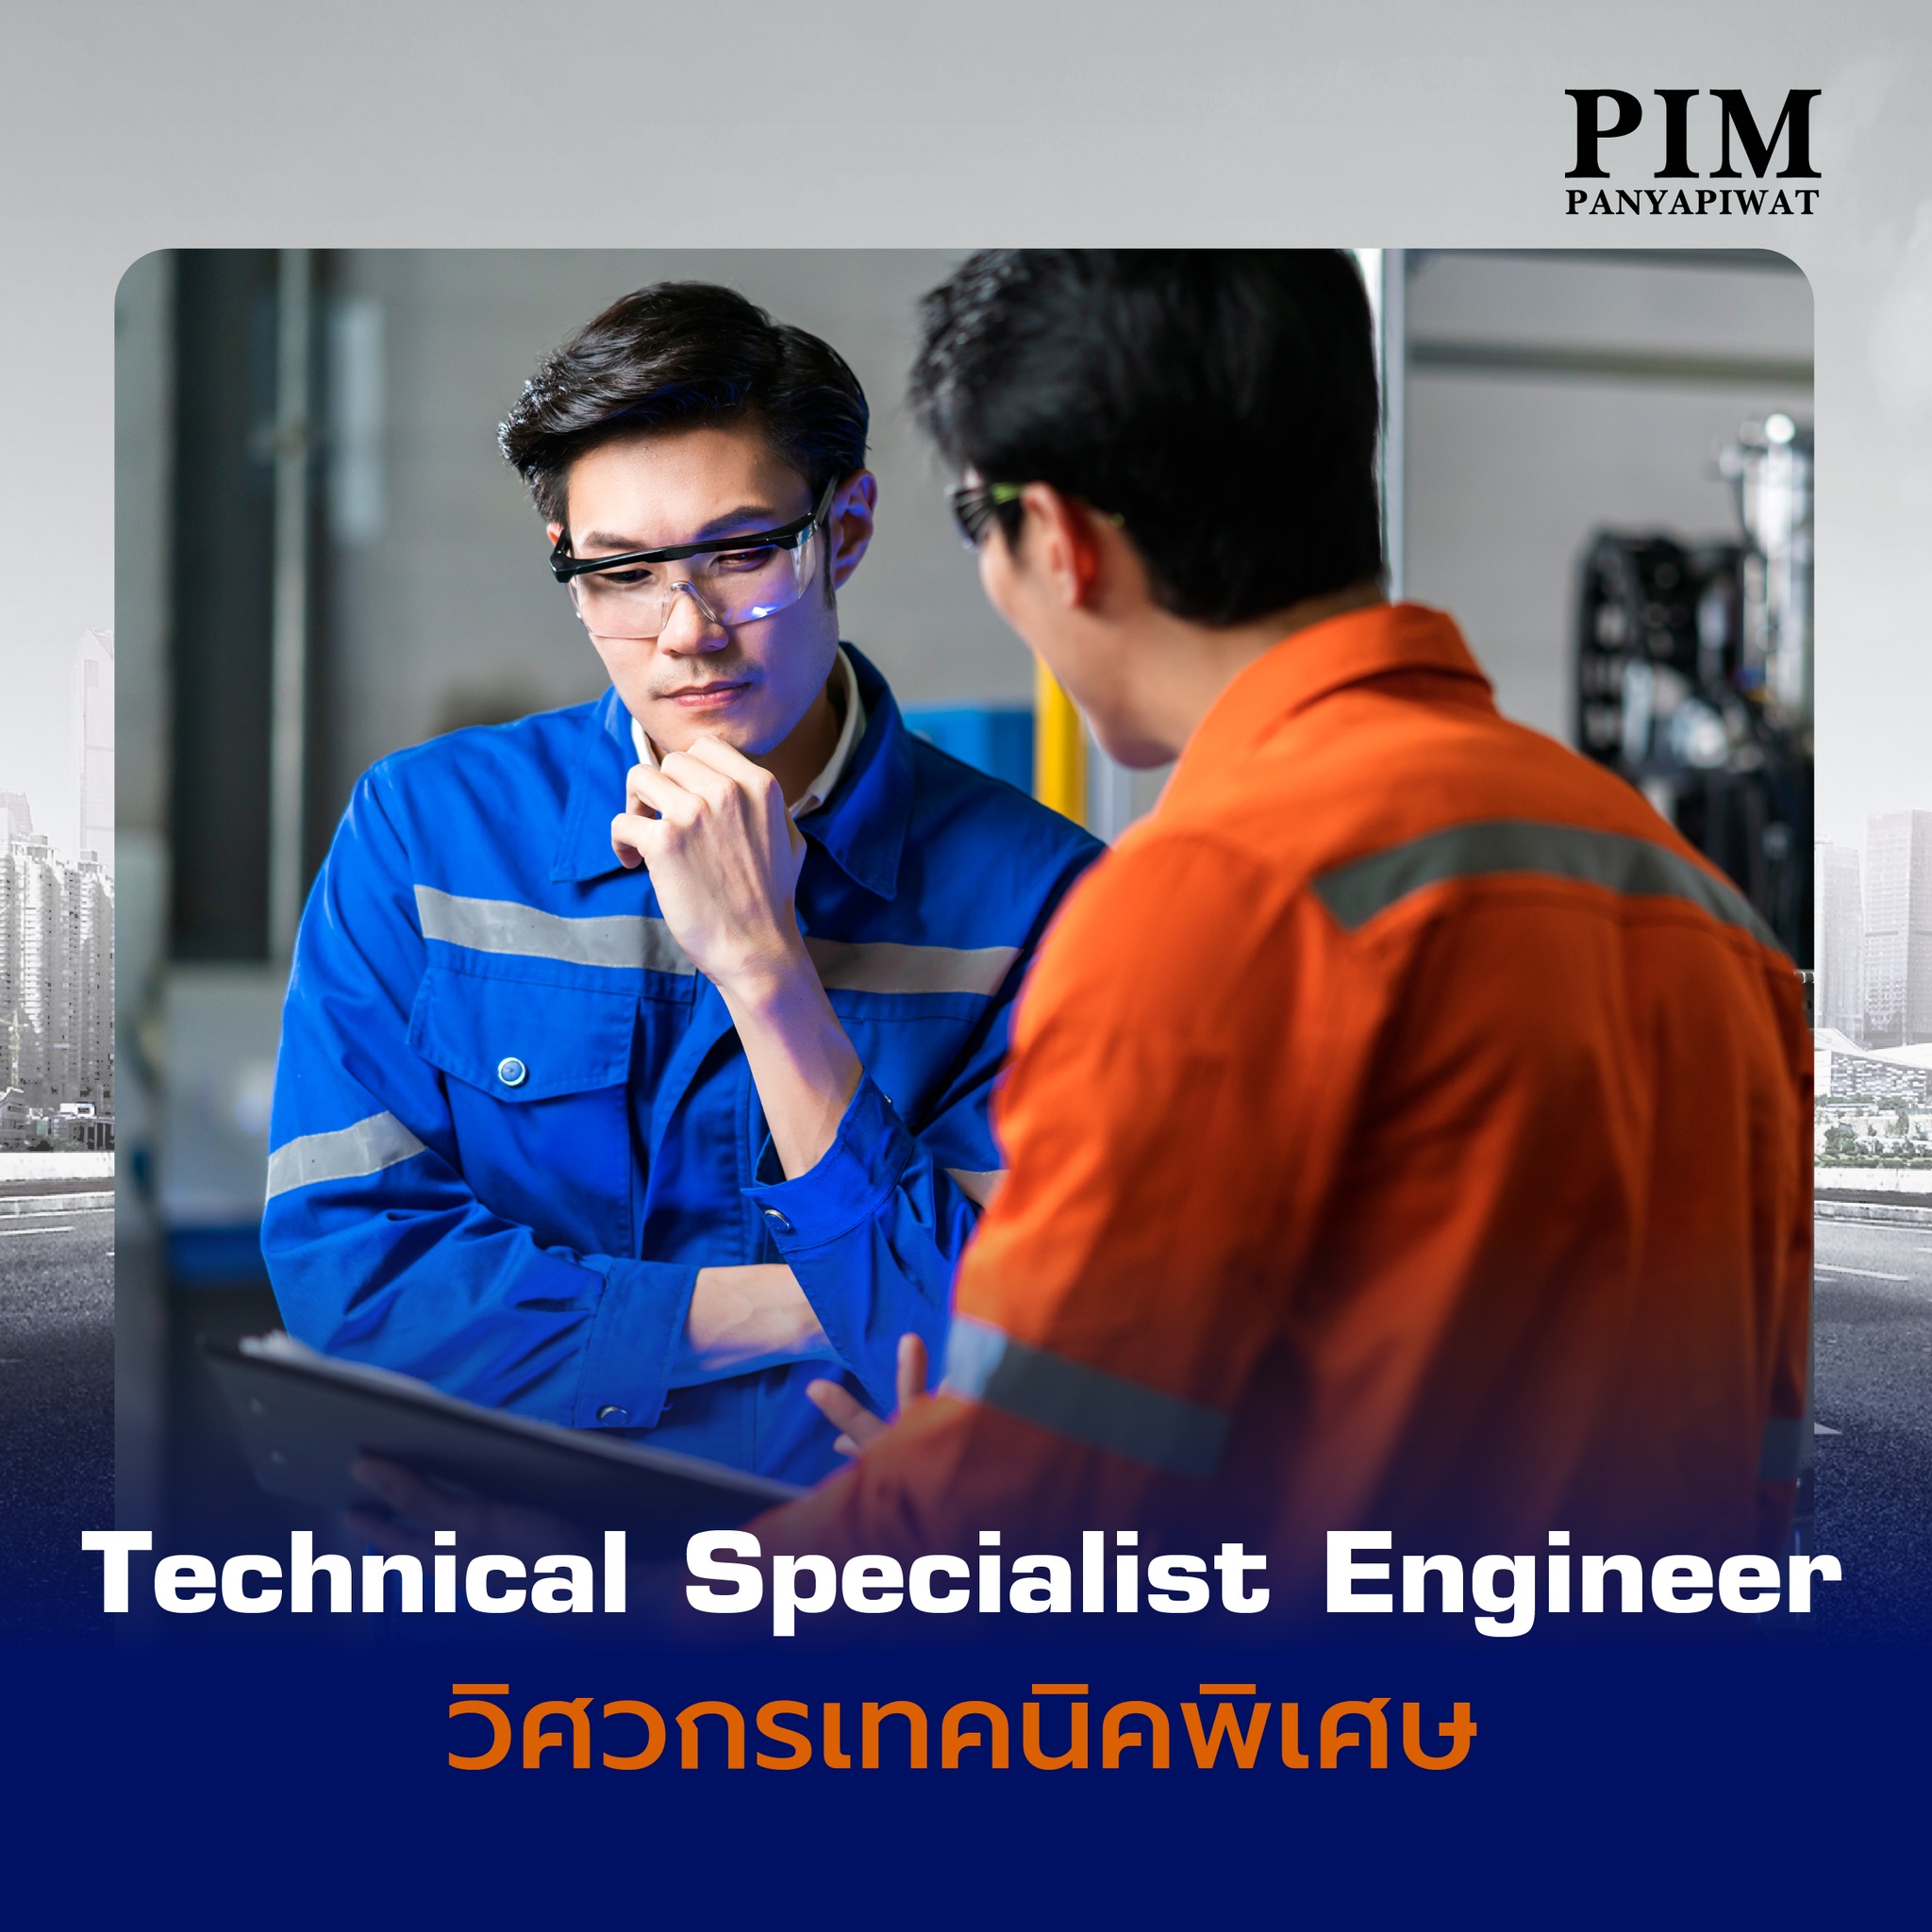 Technical Specialist Engineer วิศวกรเทคนิคพิเศษ